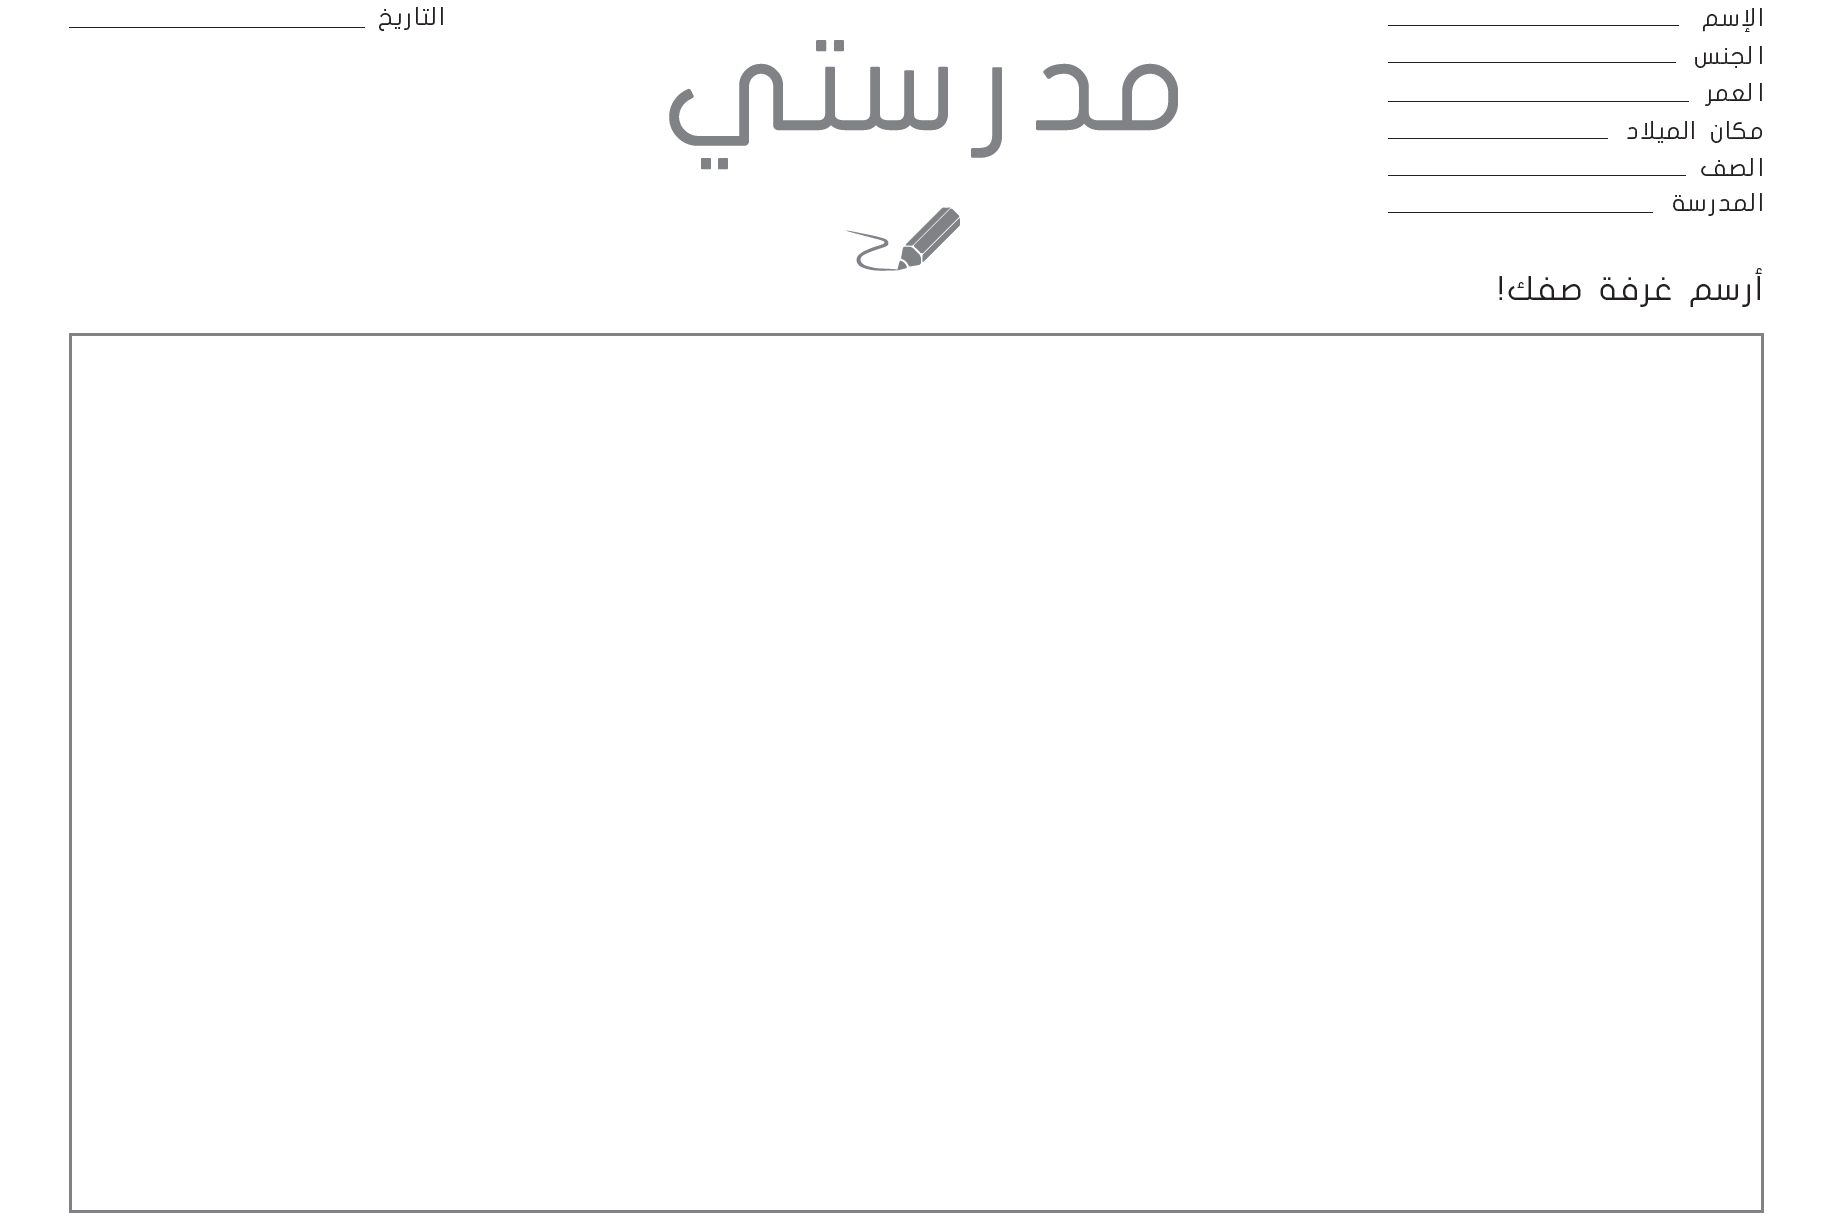 The questionnaire’s visual design is based on the Arabic text direction, which is right to left.  By combining few textual elements with the opportunity to check and circle words, the language barriers werde bridged and a faster analysis was facilitated.